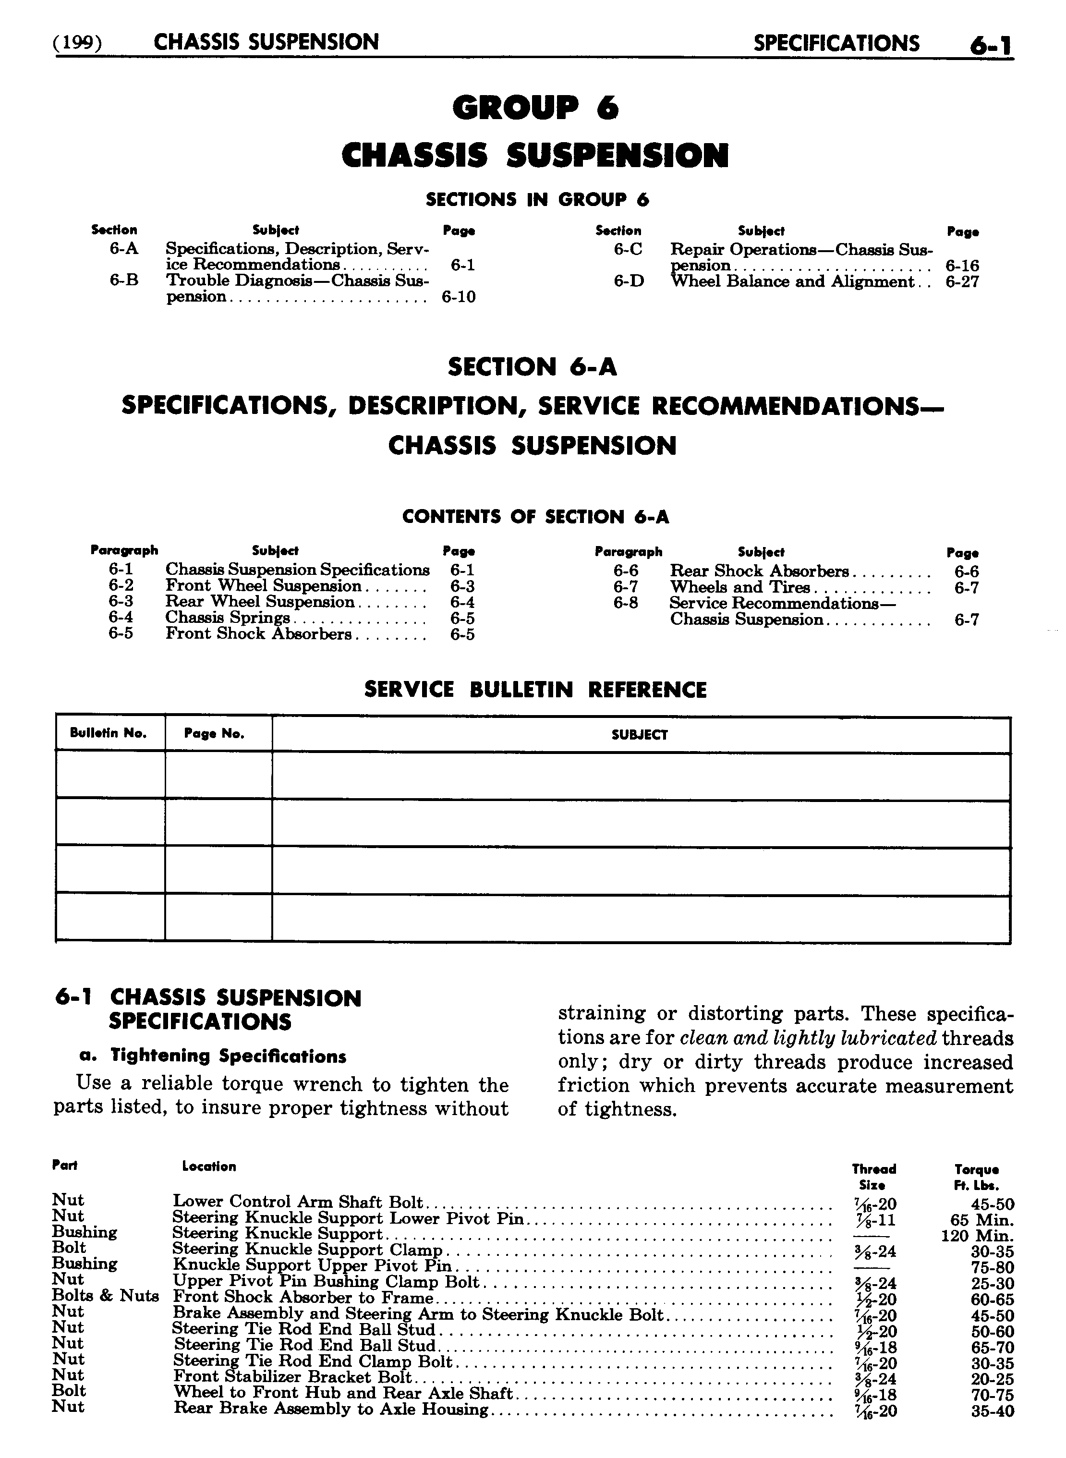 n_07 1948 Buick Shop Manual - Chassis Suspension-001-001.jpg